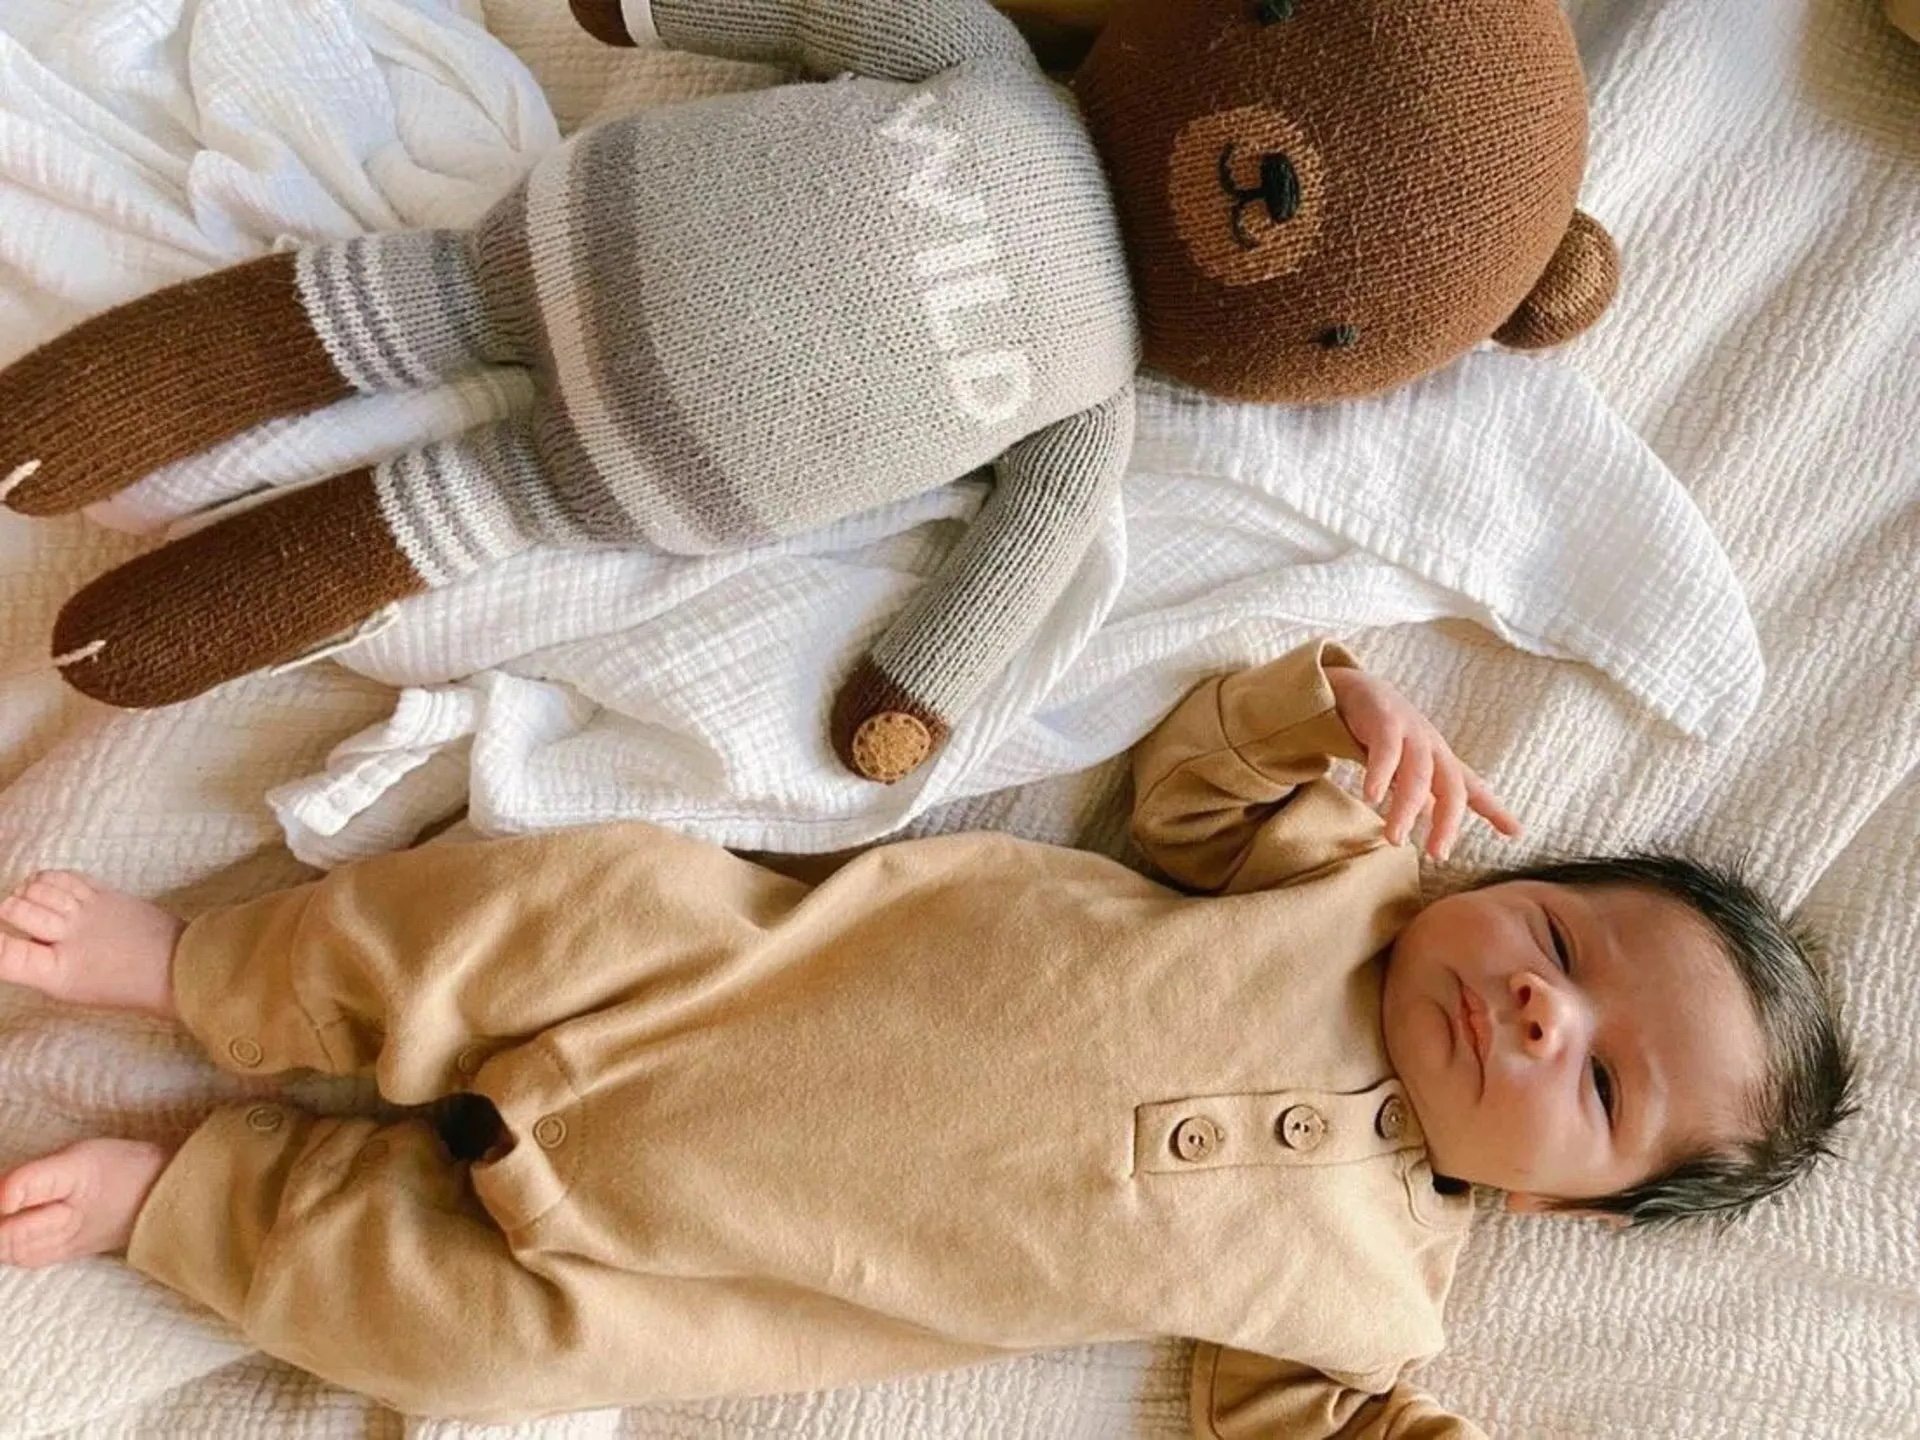 7 TIPS ON HOW TO BUY GENDER NEUTRAL BABY PRODUCTS